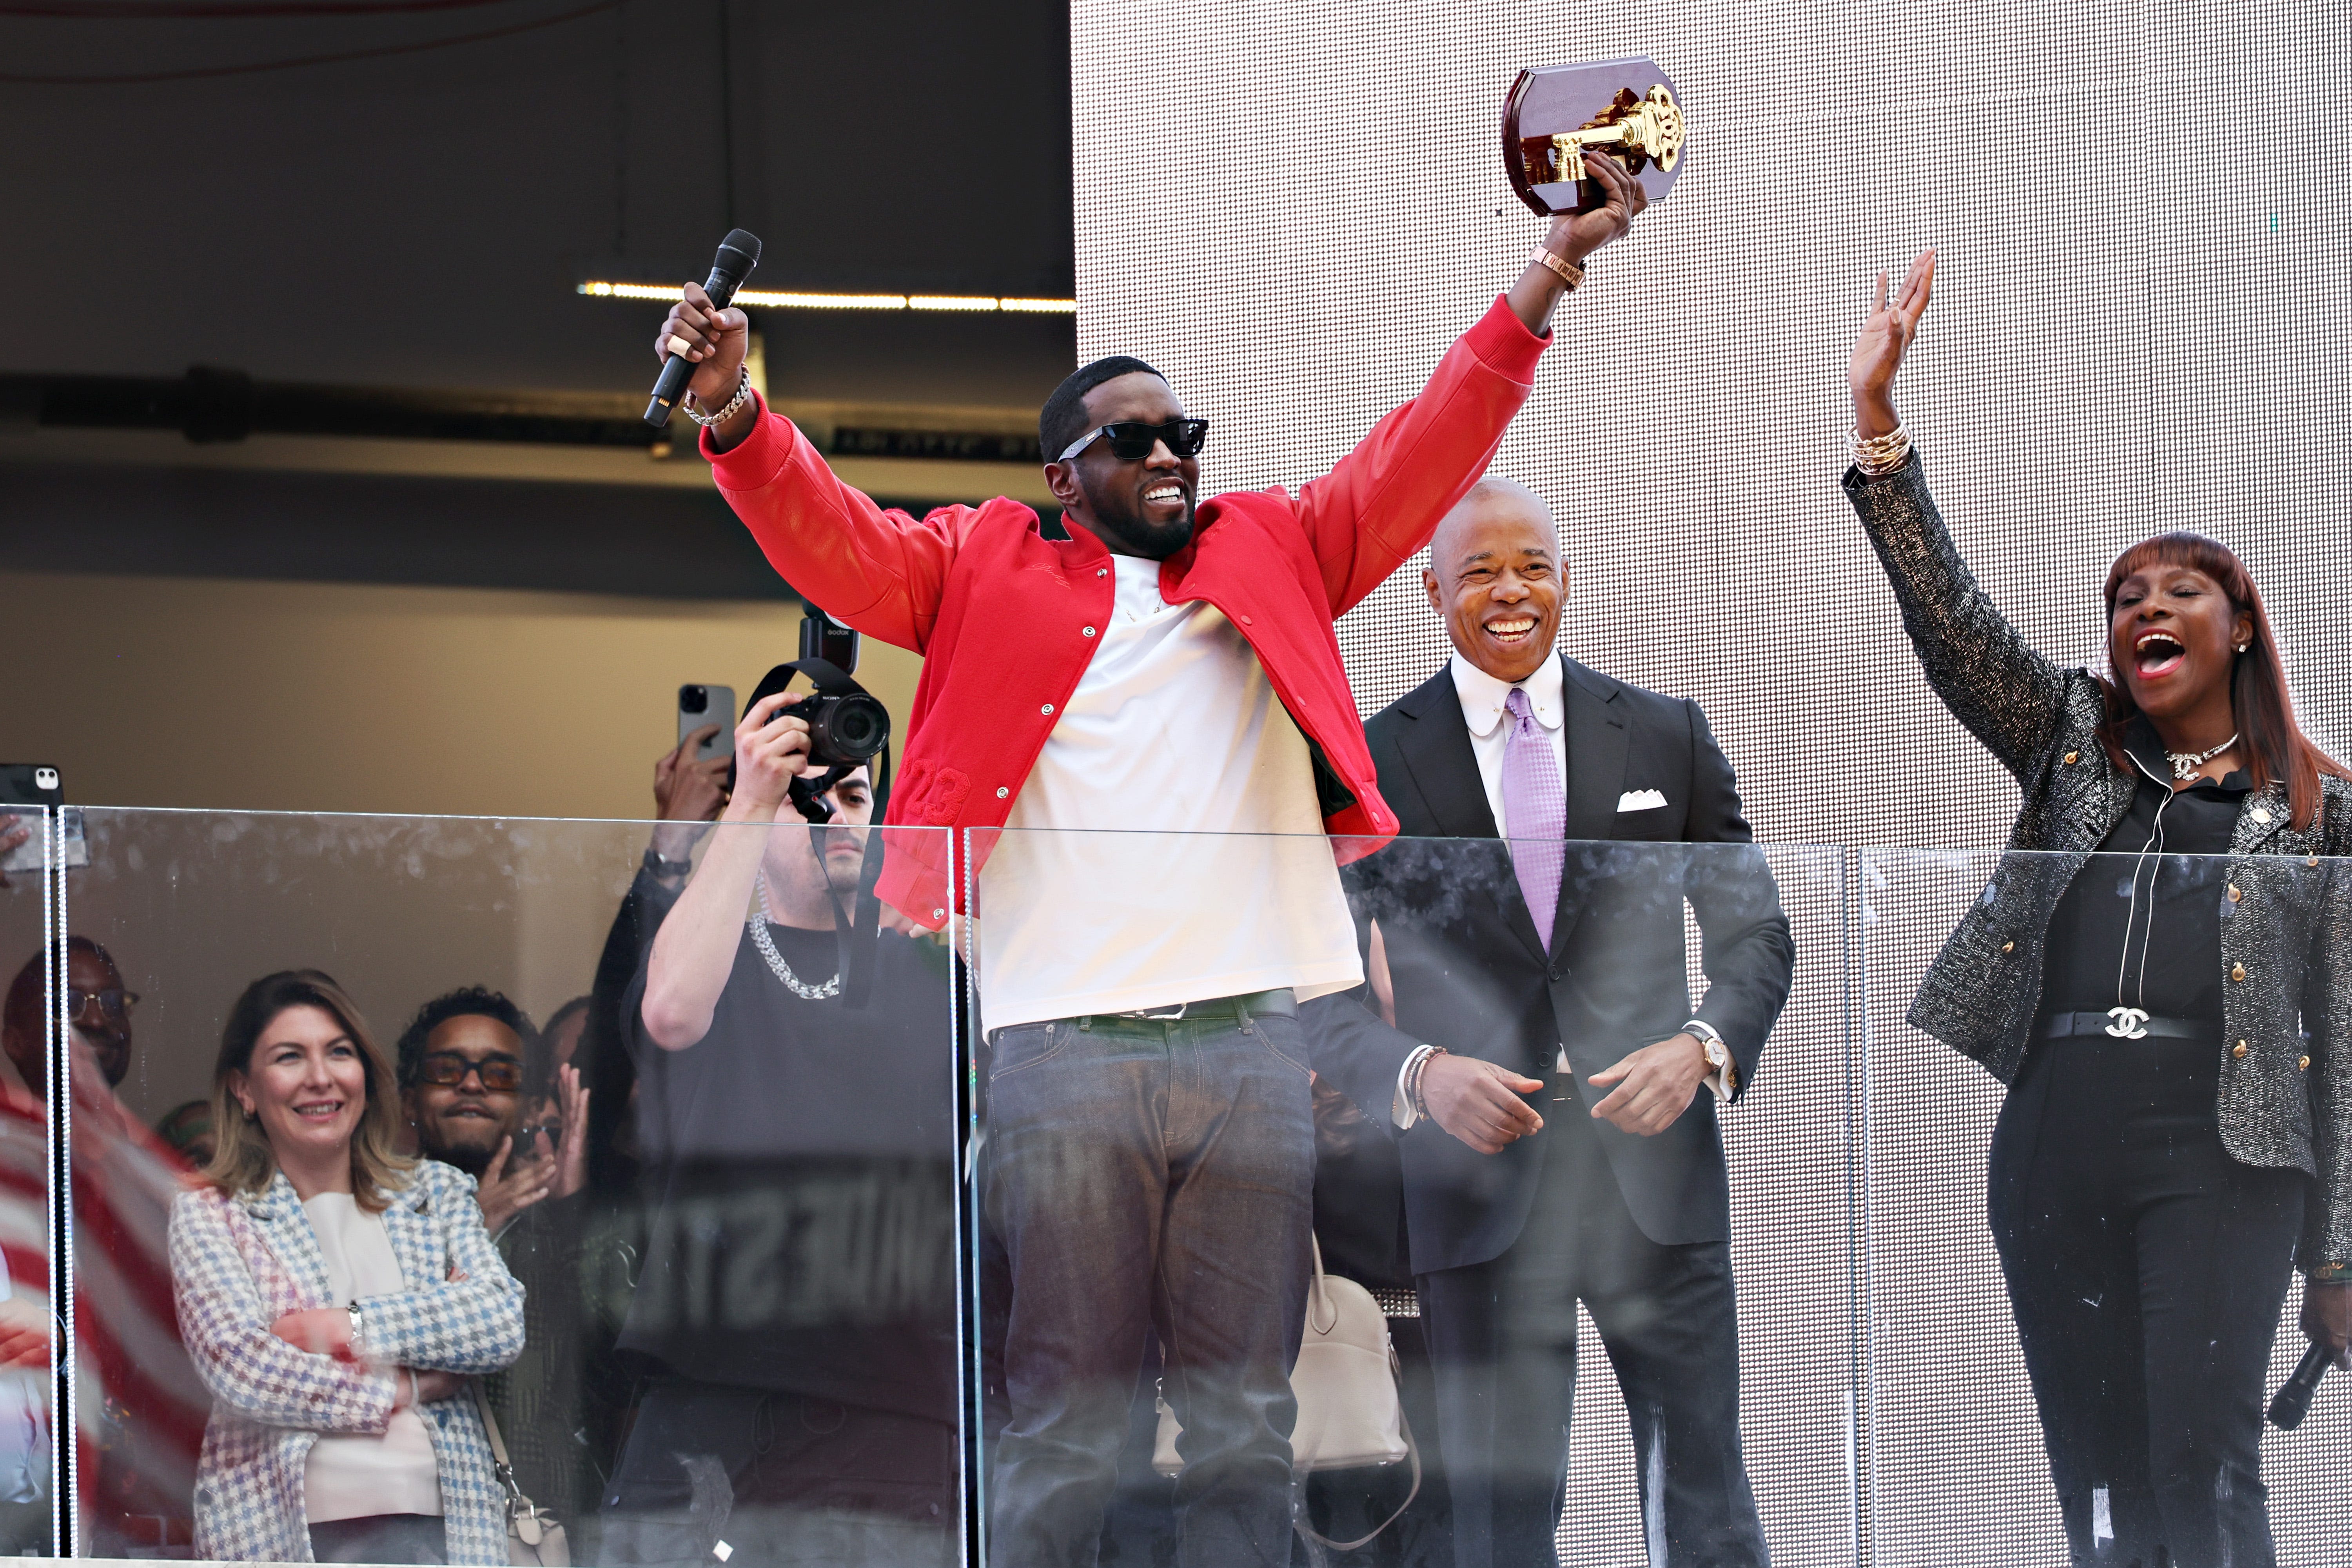 Diddy's key to New York City rescinded after Cassie Ventura assault video